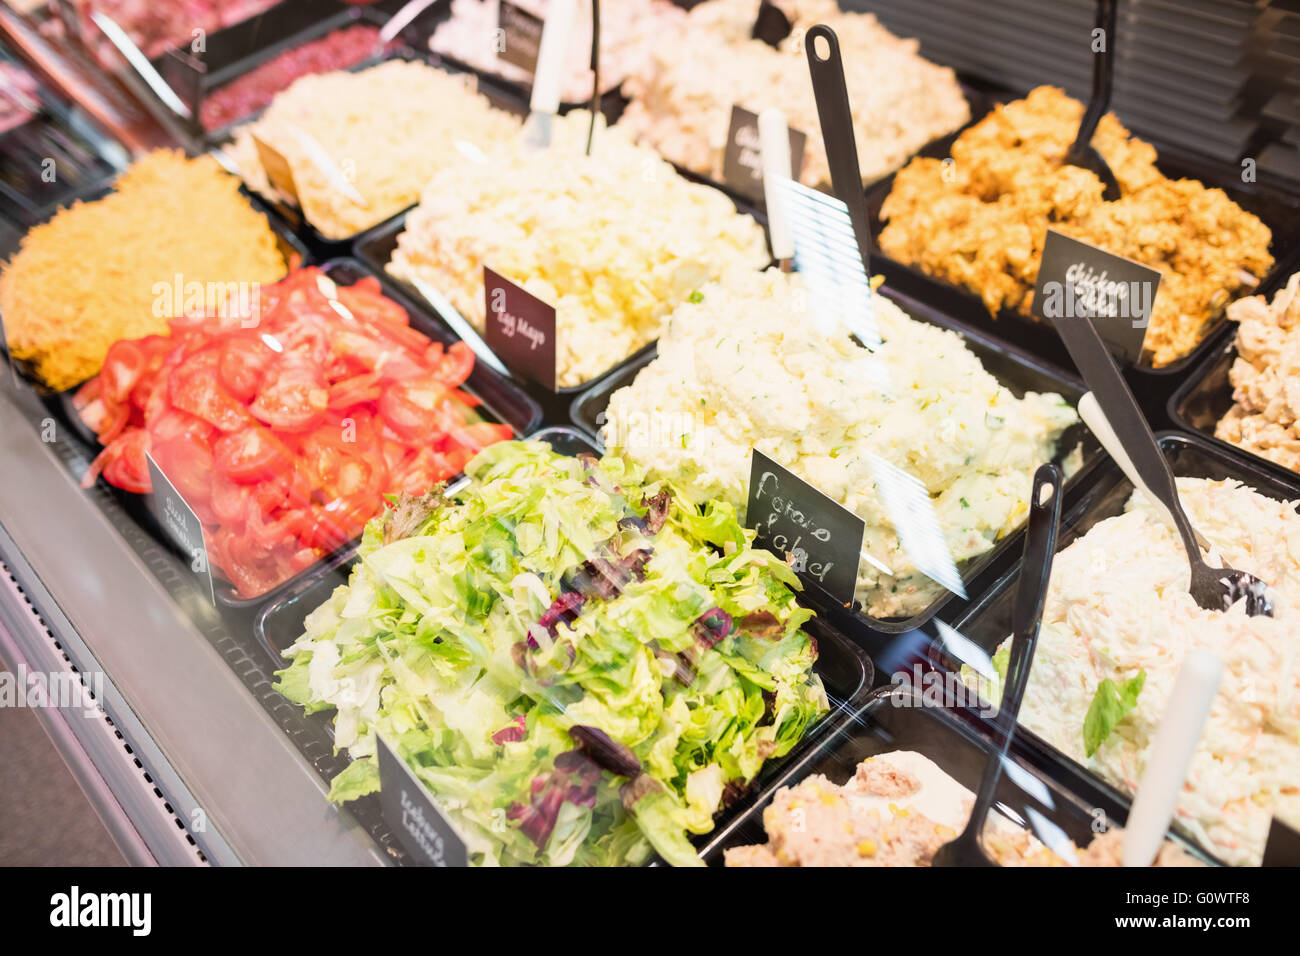 Sales counter with salads Stock Photo